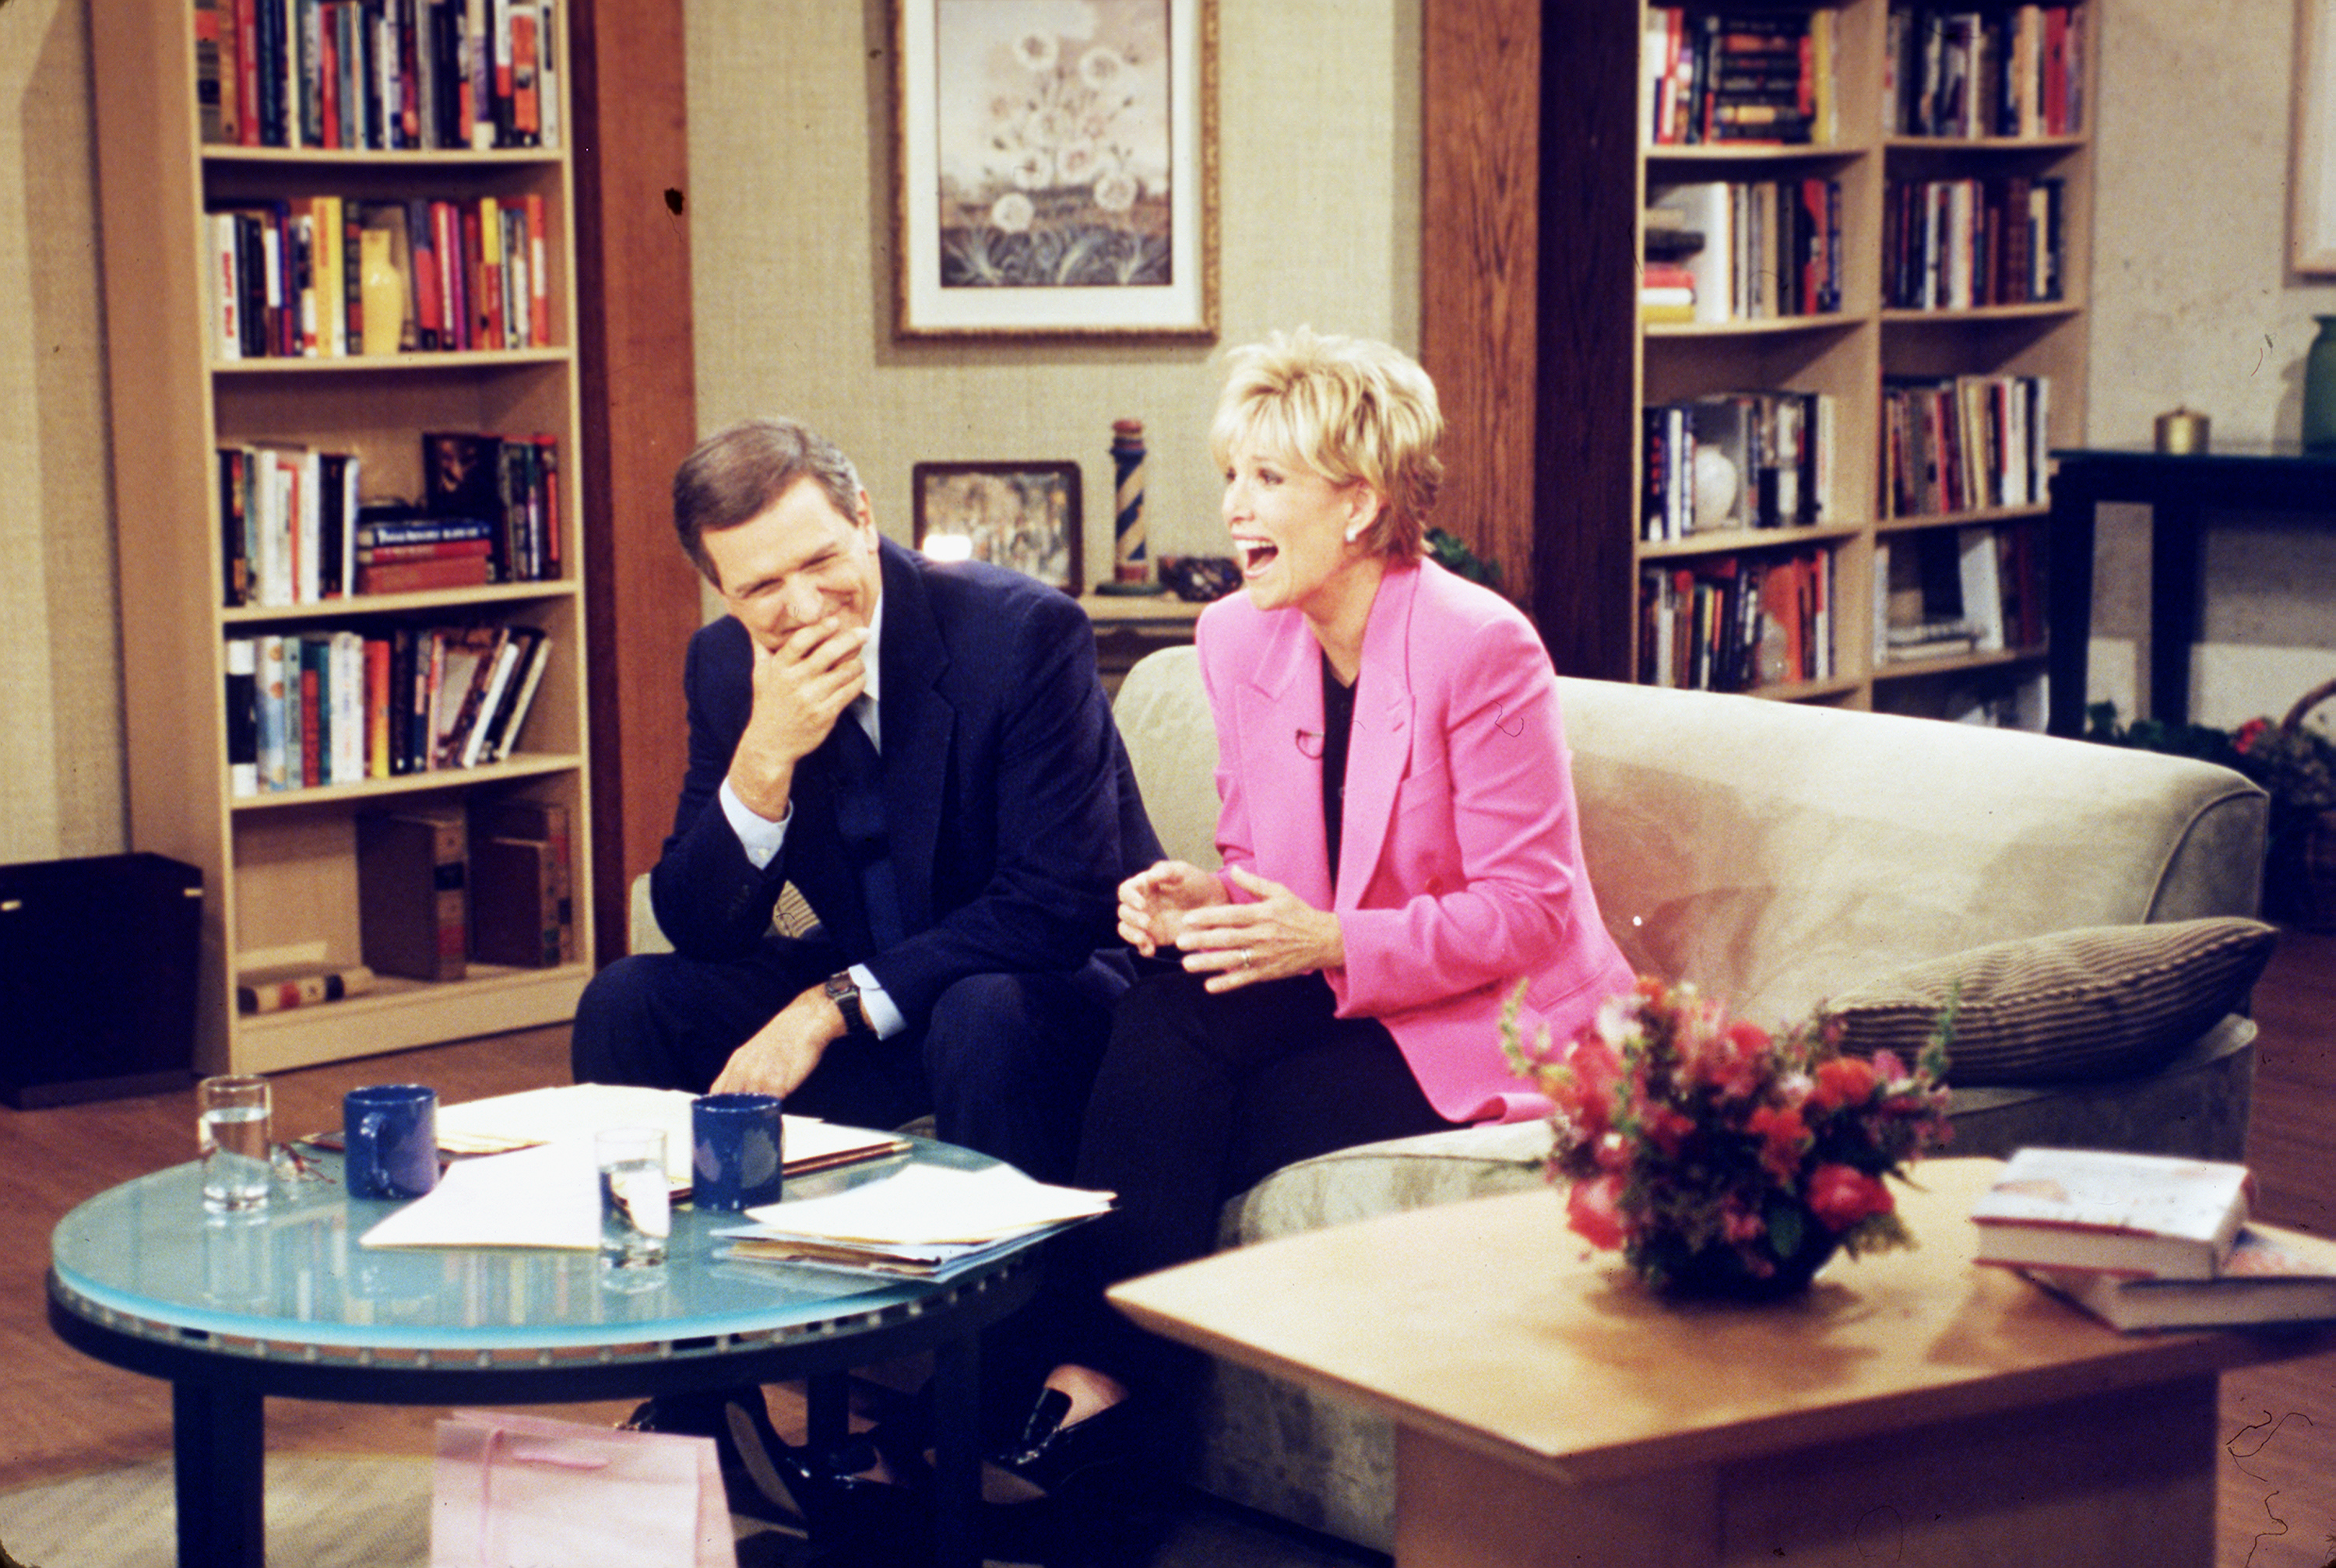 Charles Gibson and Joan Lunden on “Good Morning America” on September 5, 1997 | Source: Getty Images